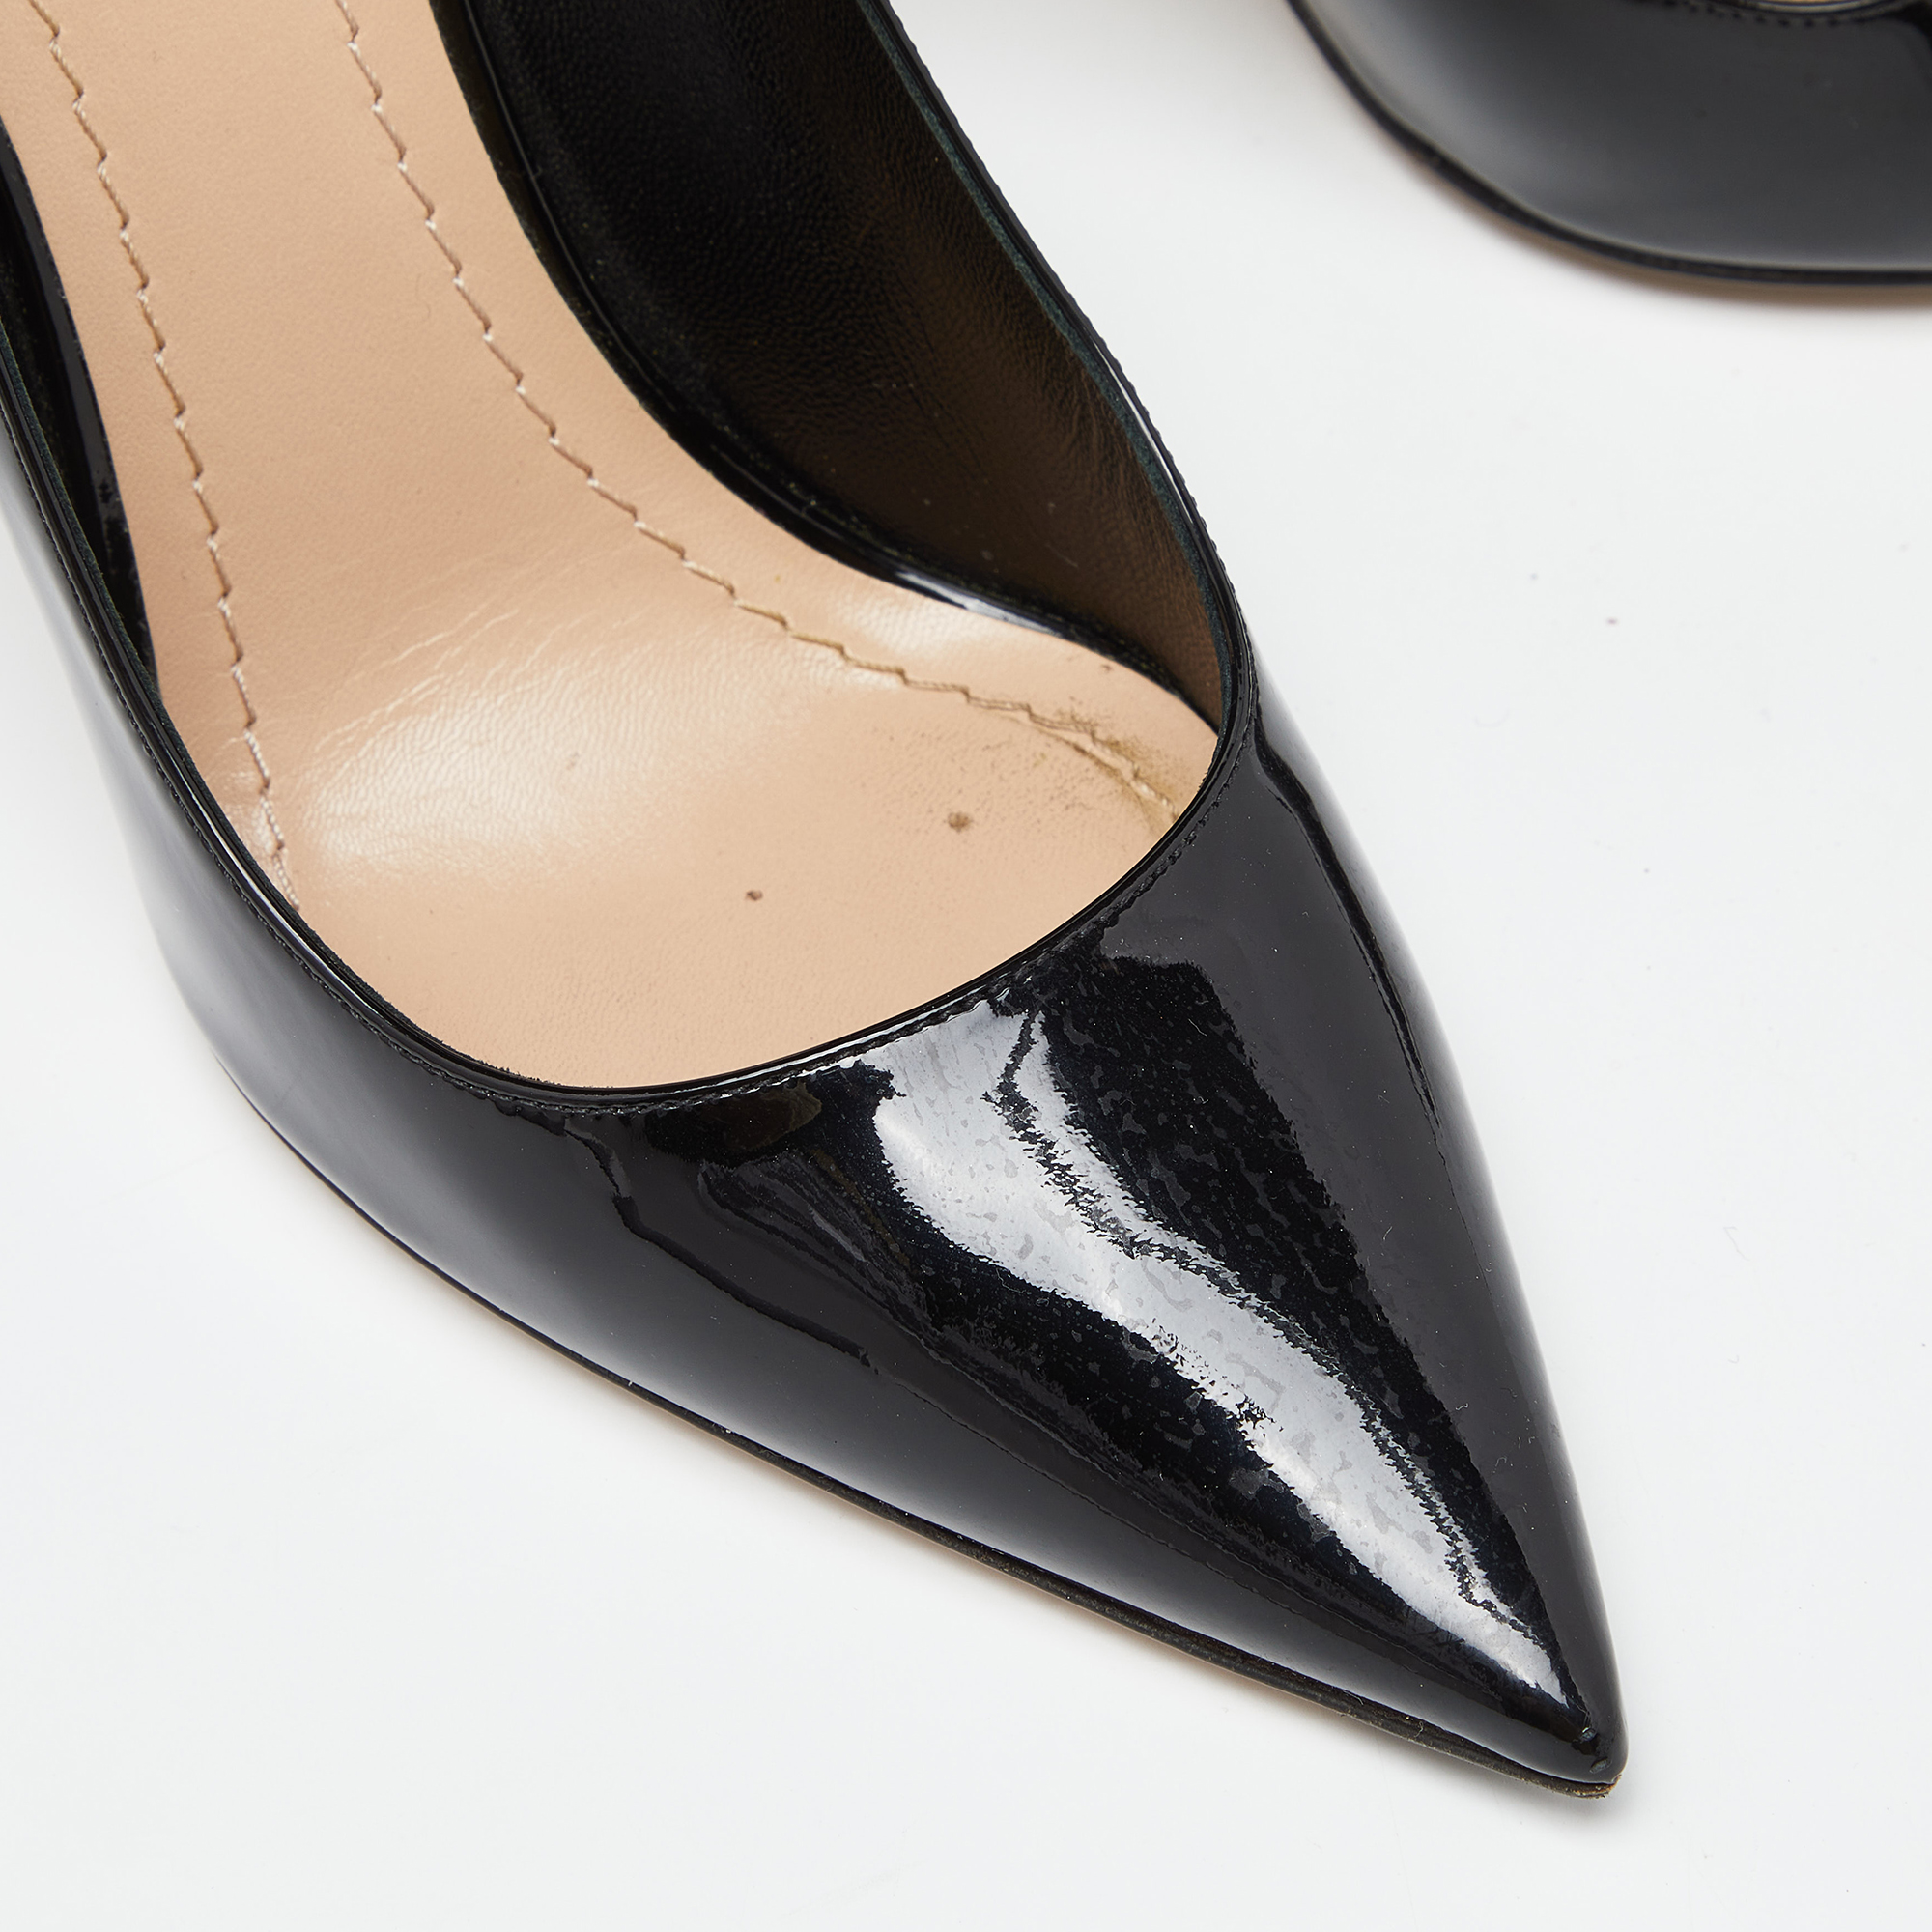 Dior Black Patent Leather Pointed Toe Pumps Size 36.5